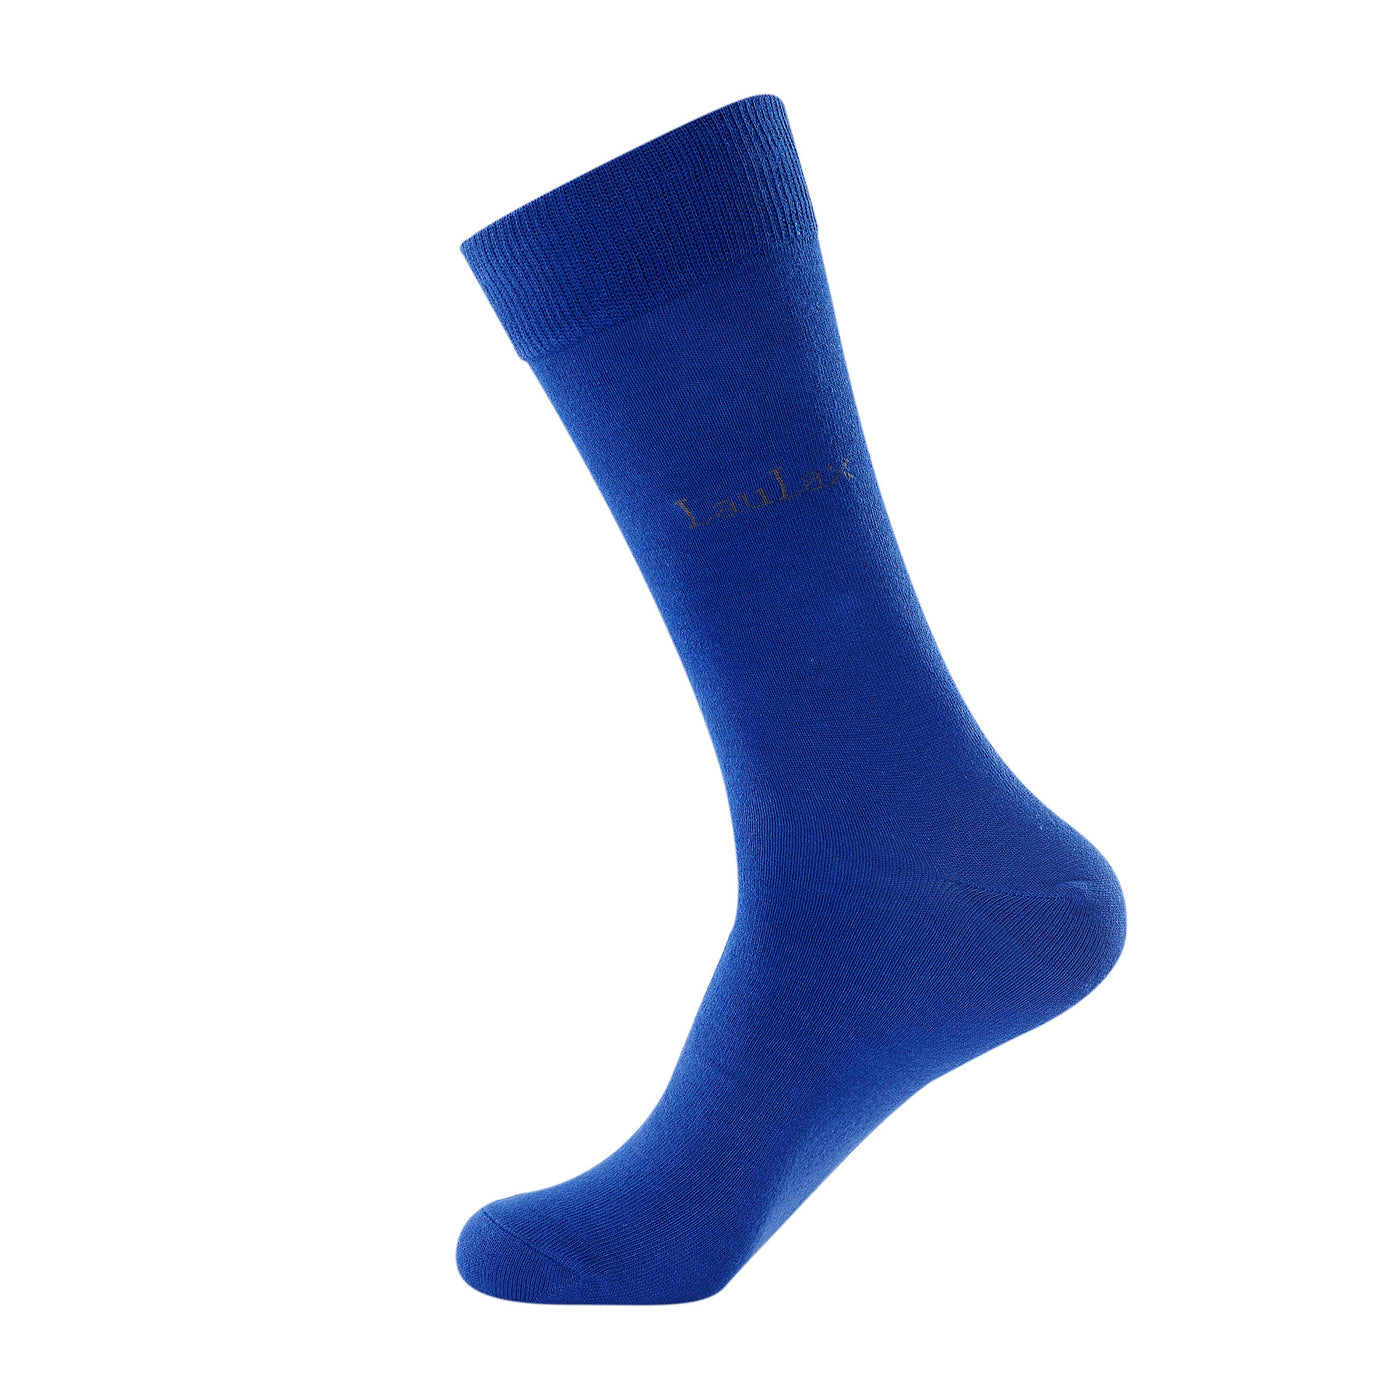 High Quality Formal Finest Combed Cotton Socks In Blue